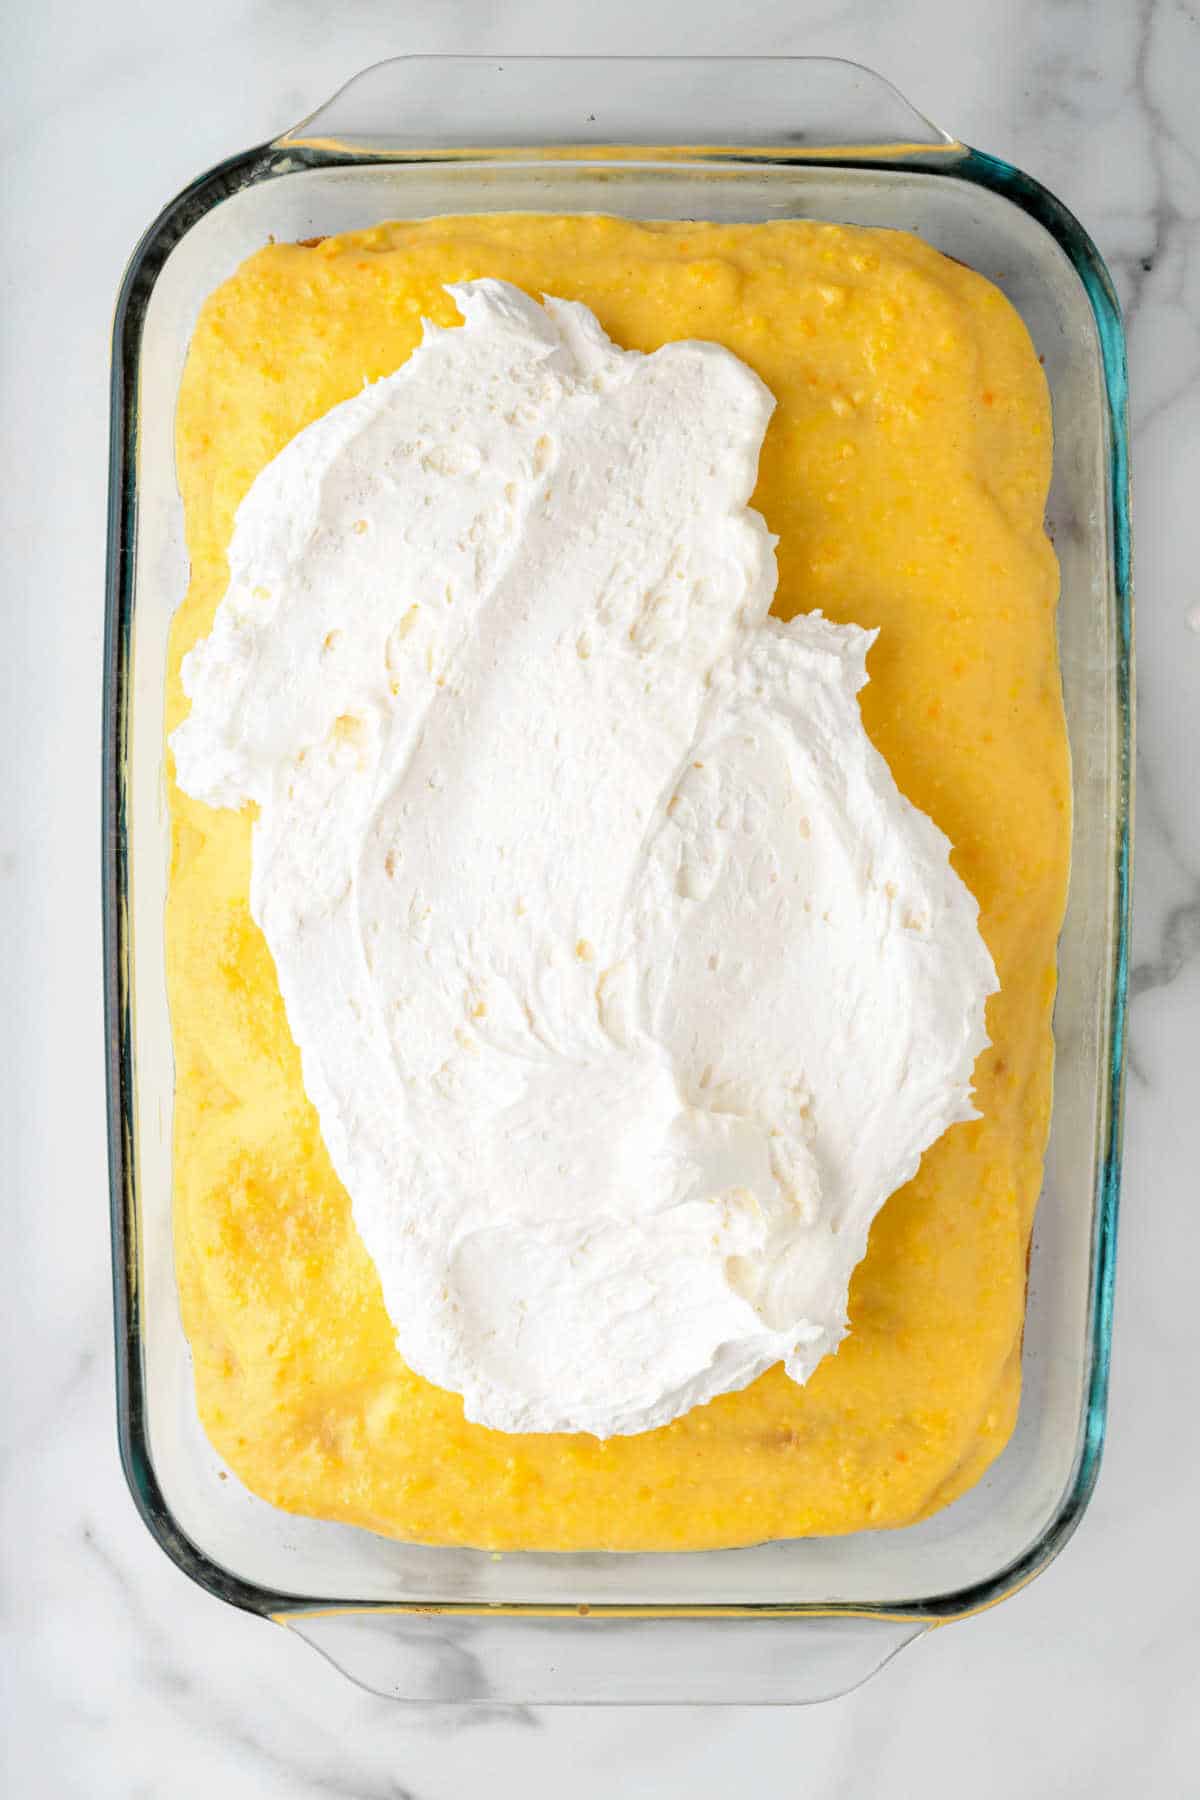 Cool whip being spread on a yellow cake.